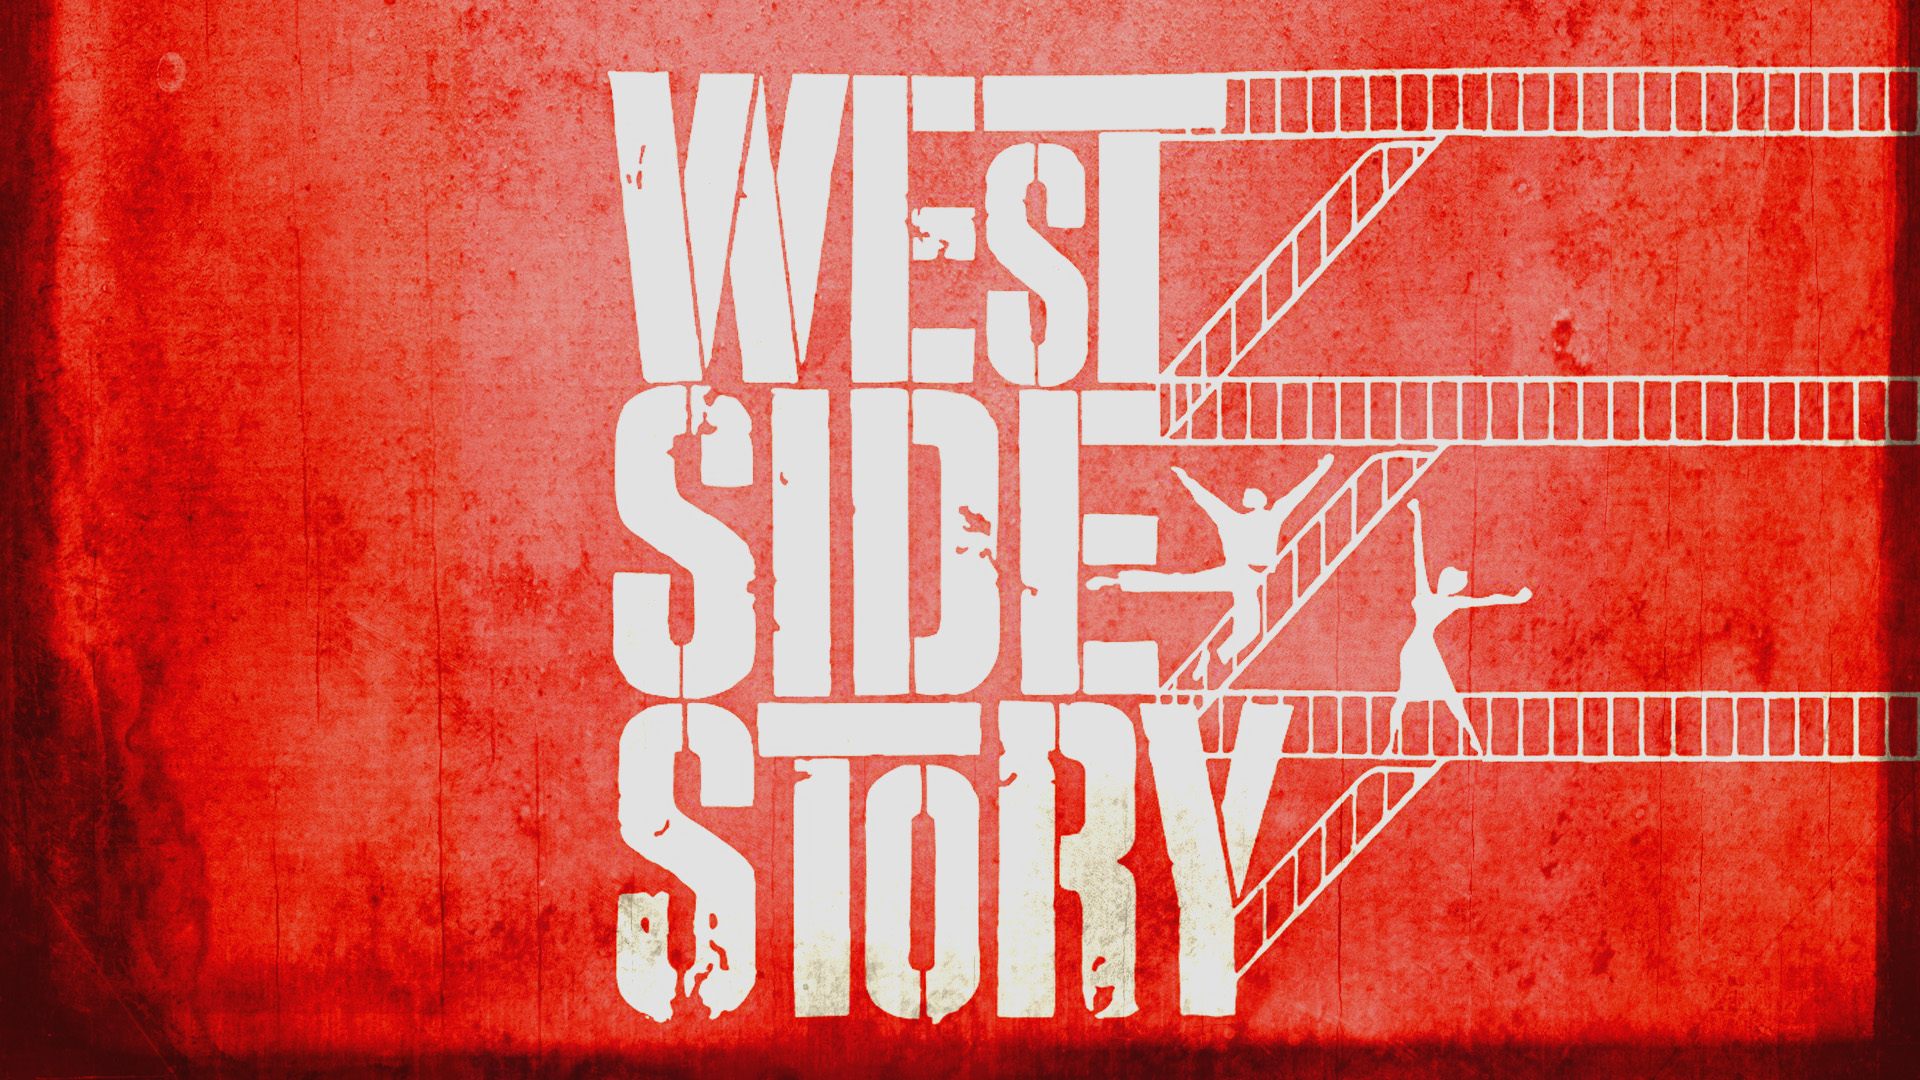 000 west side story